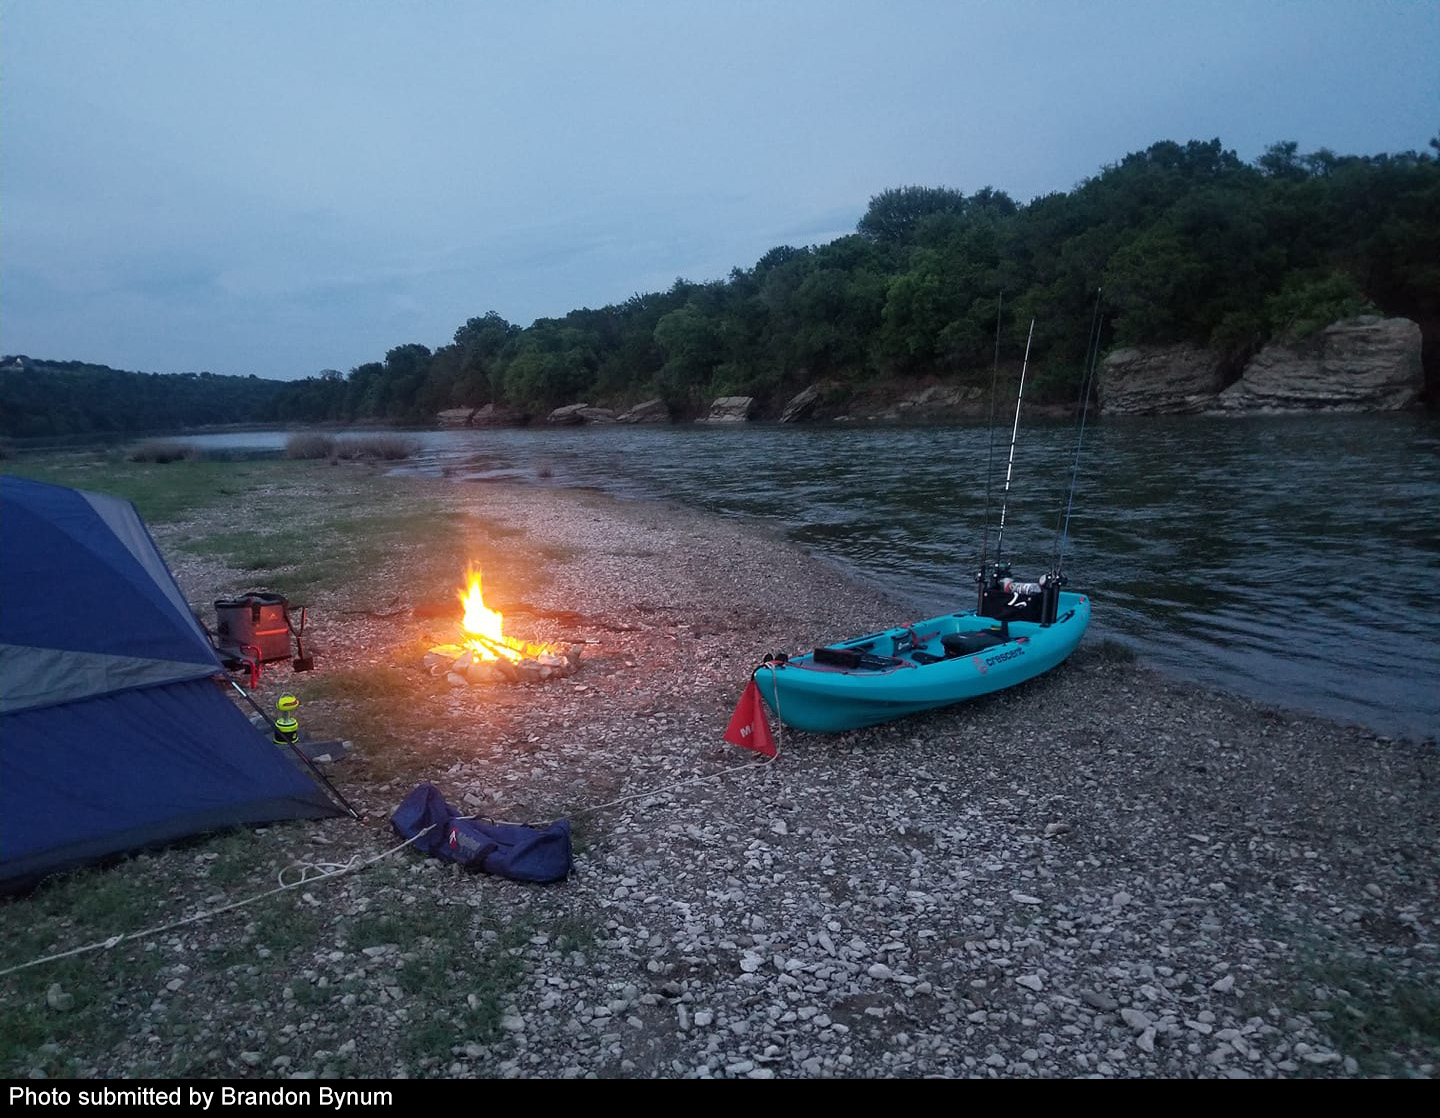 Tent and campfire along river